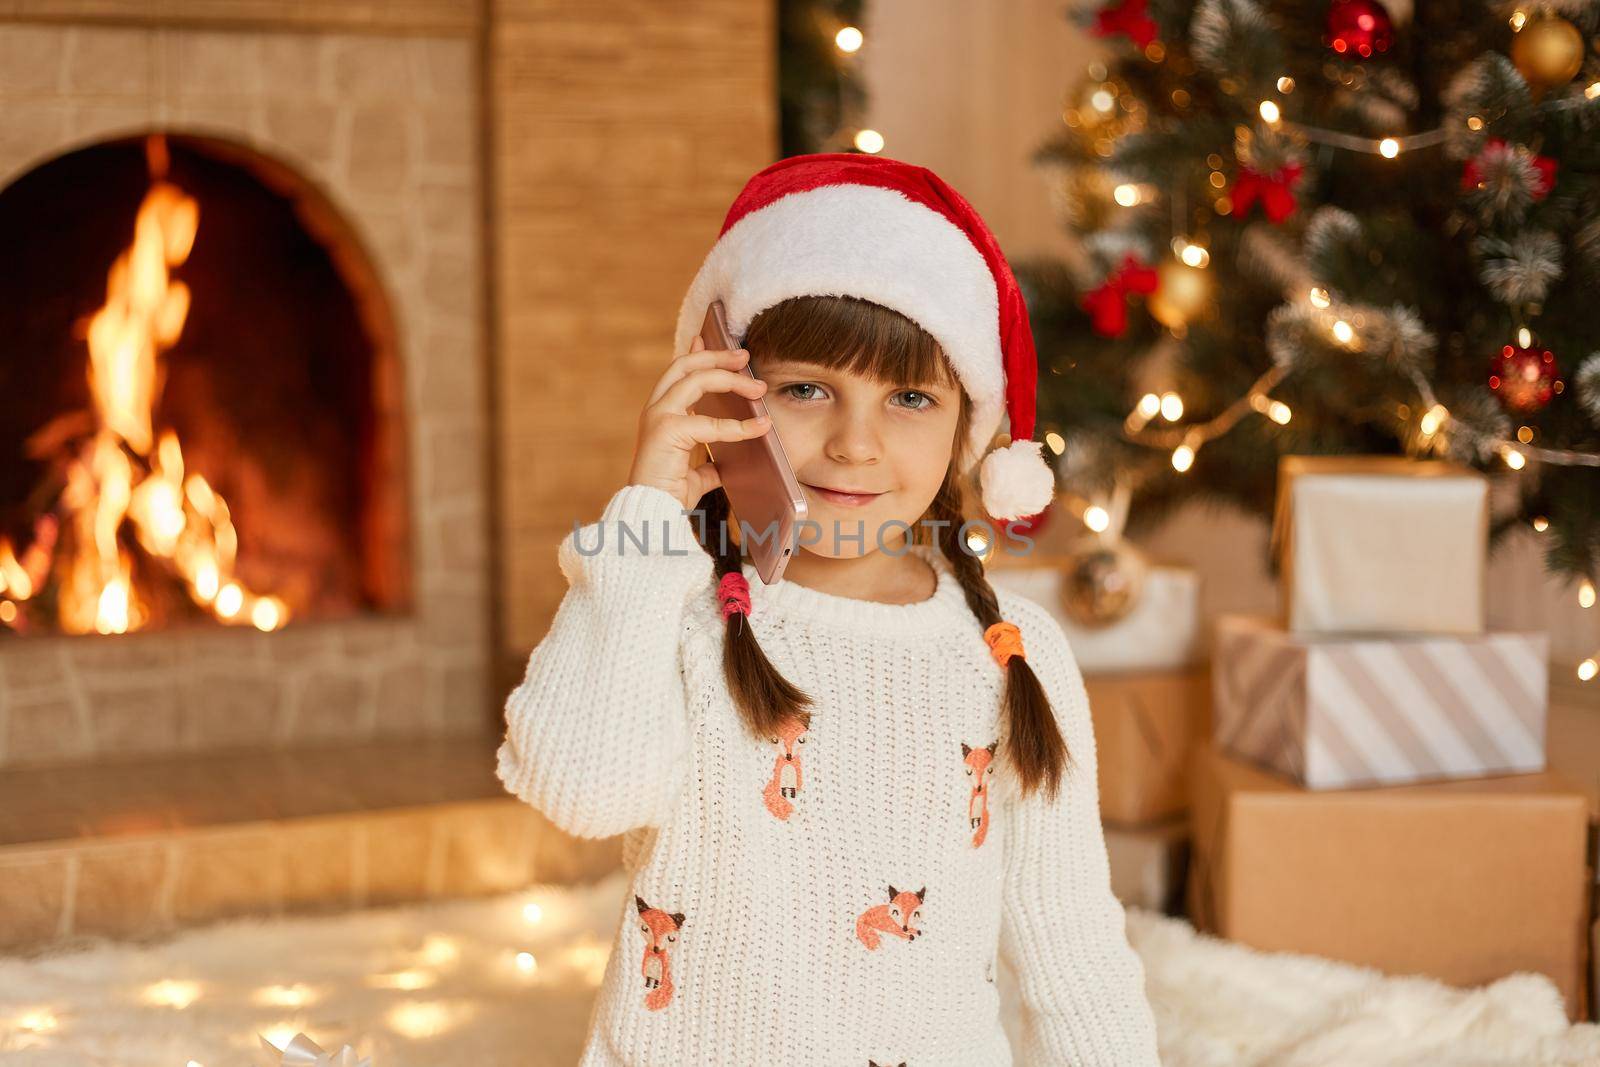 Charming good looking female child talking on phone to somebody, congratulating, having two pigtails, wearing santa hat, looks at camera while posing in living room with Christmas decoration.